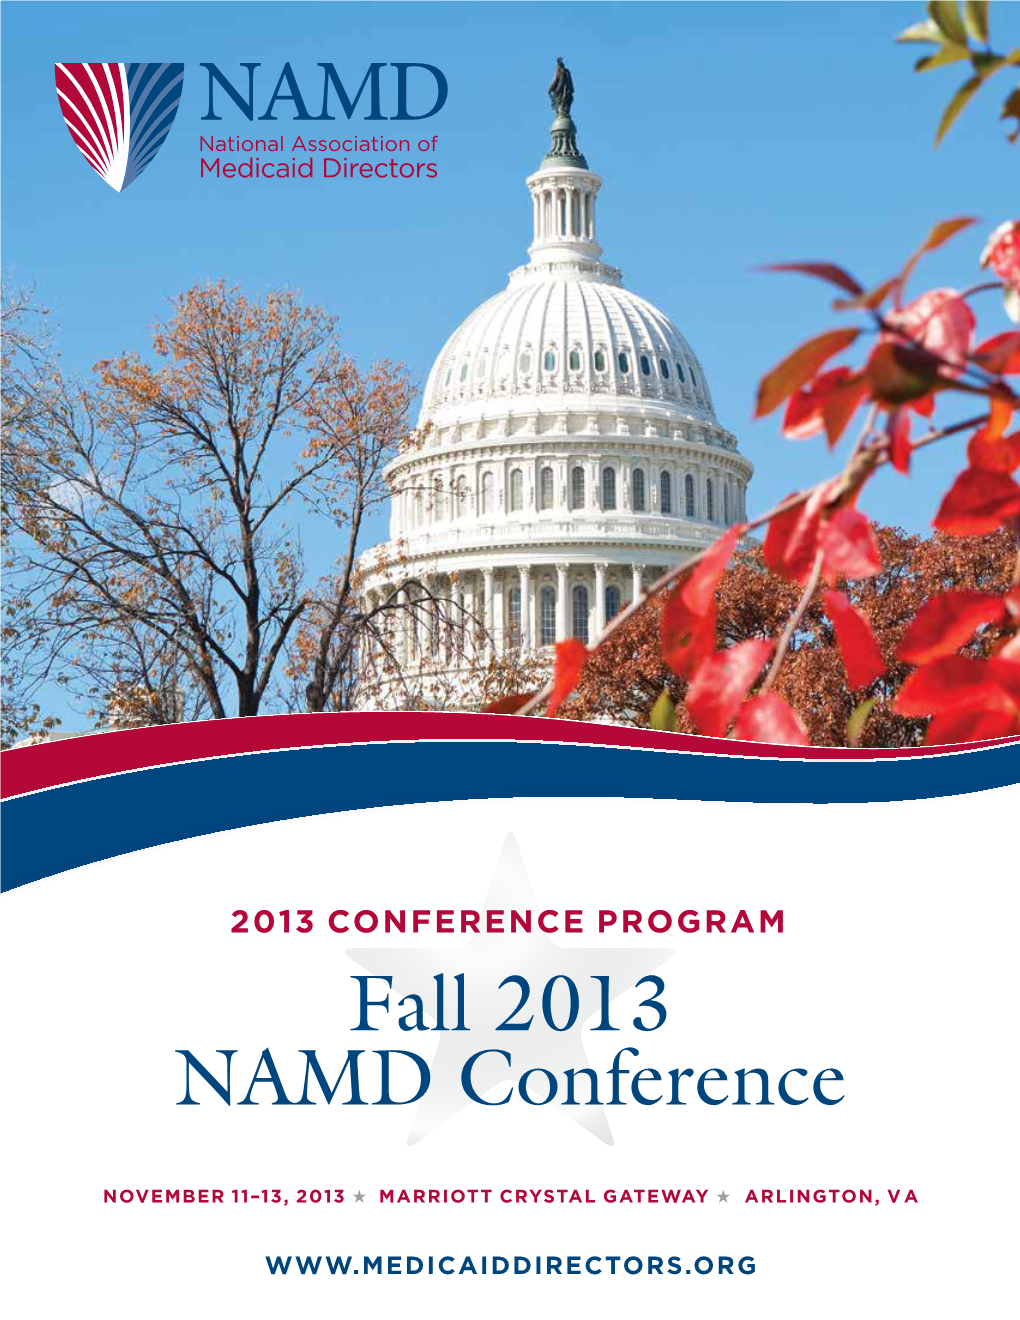 Fall 2013 NAMD Conference